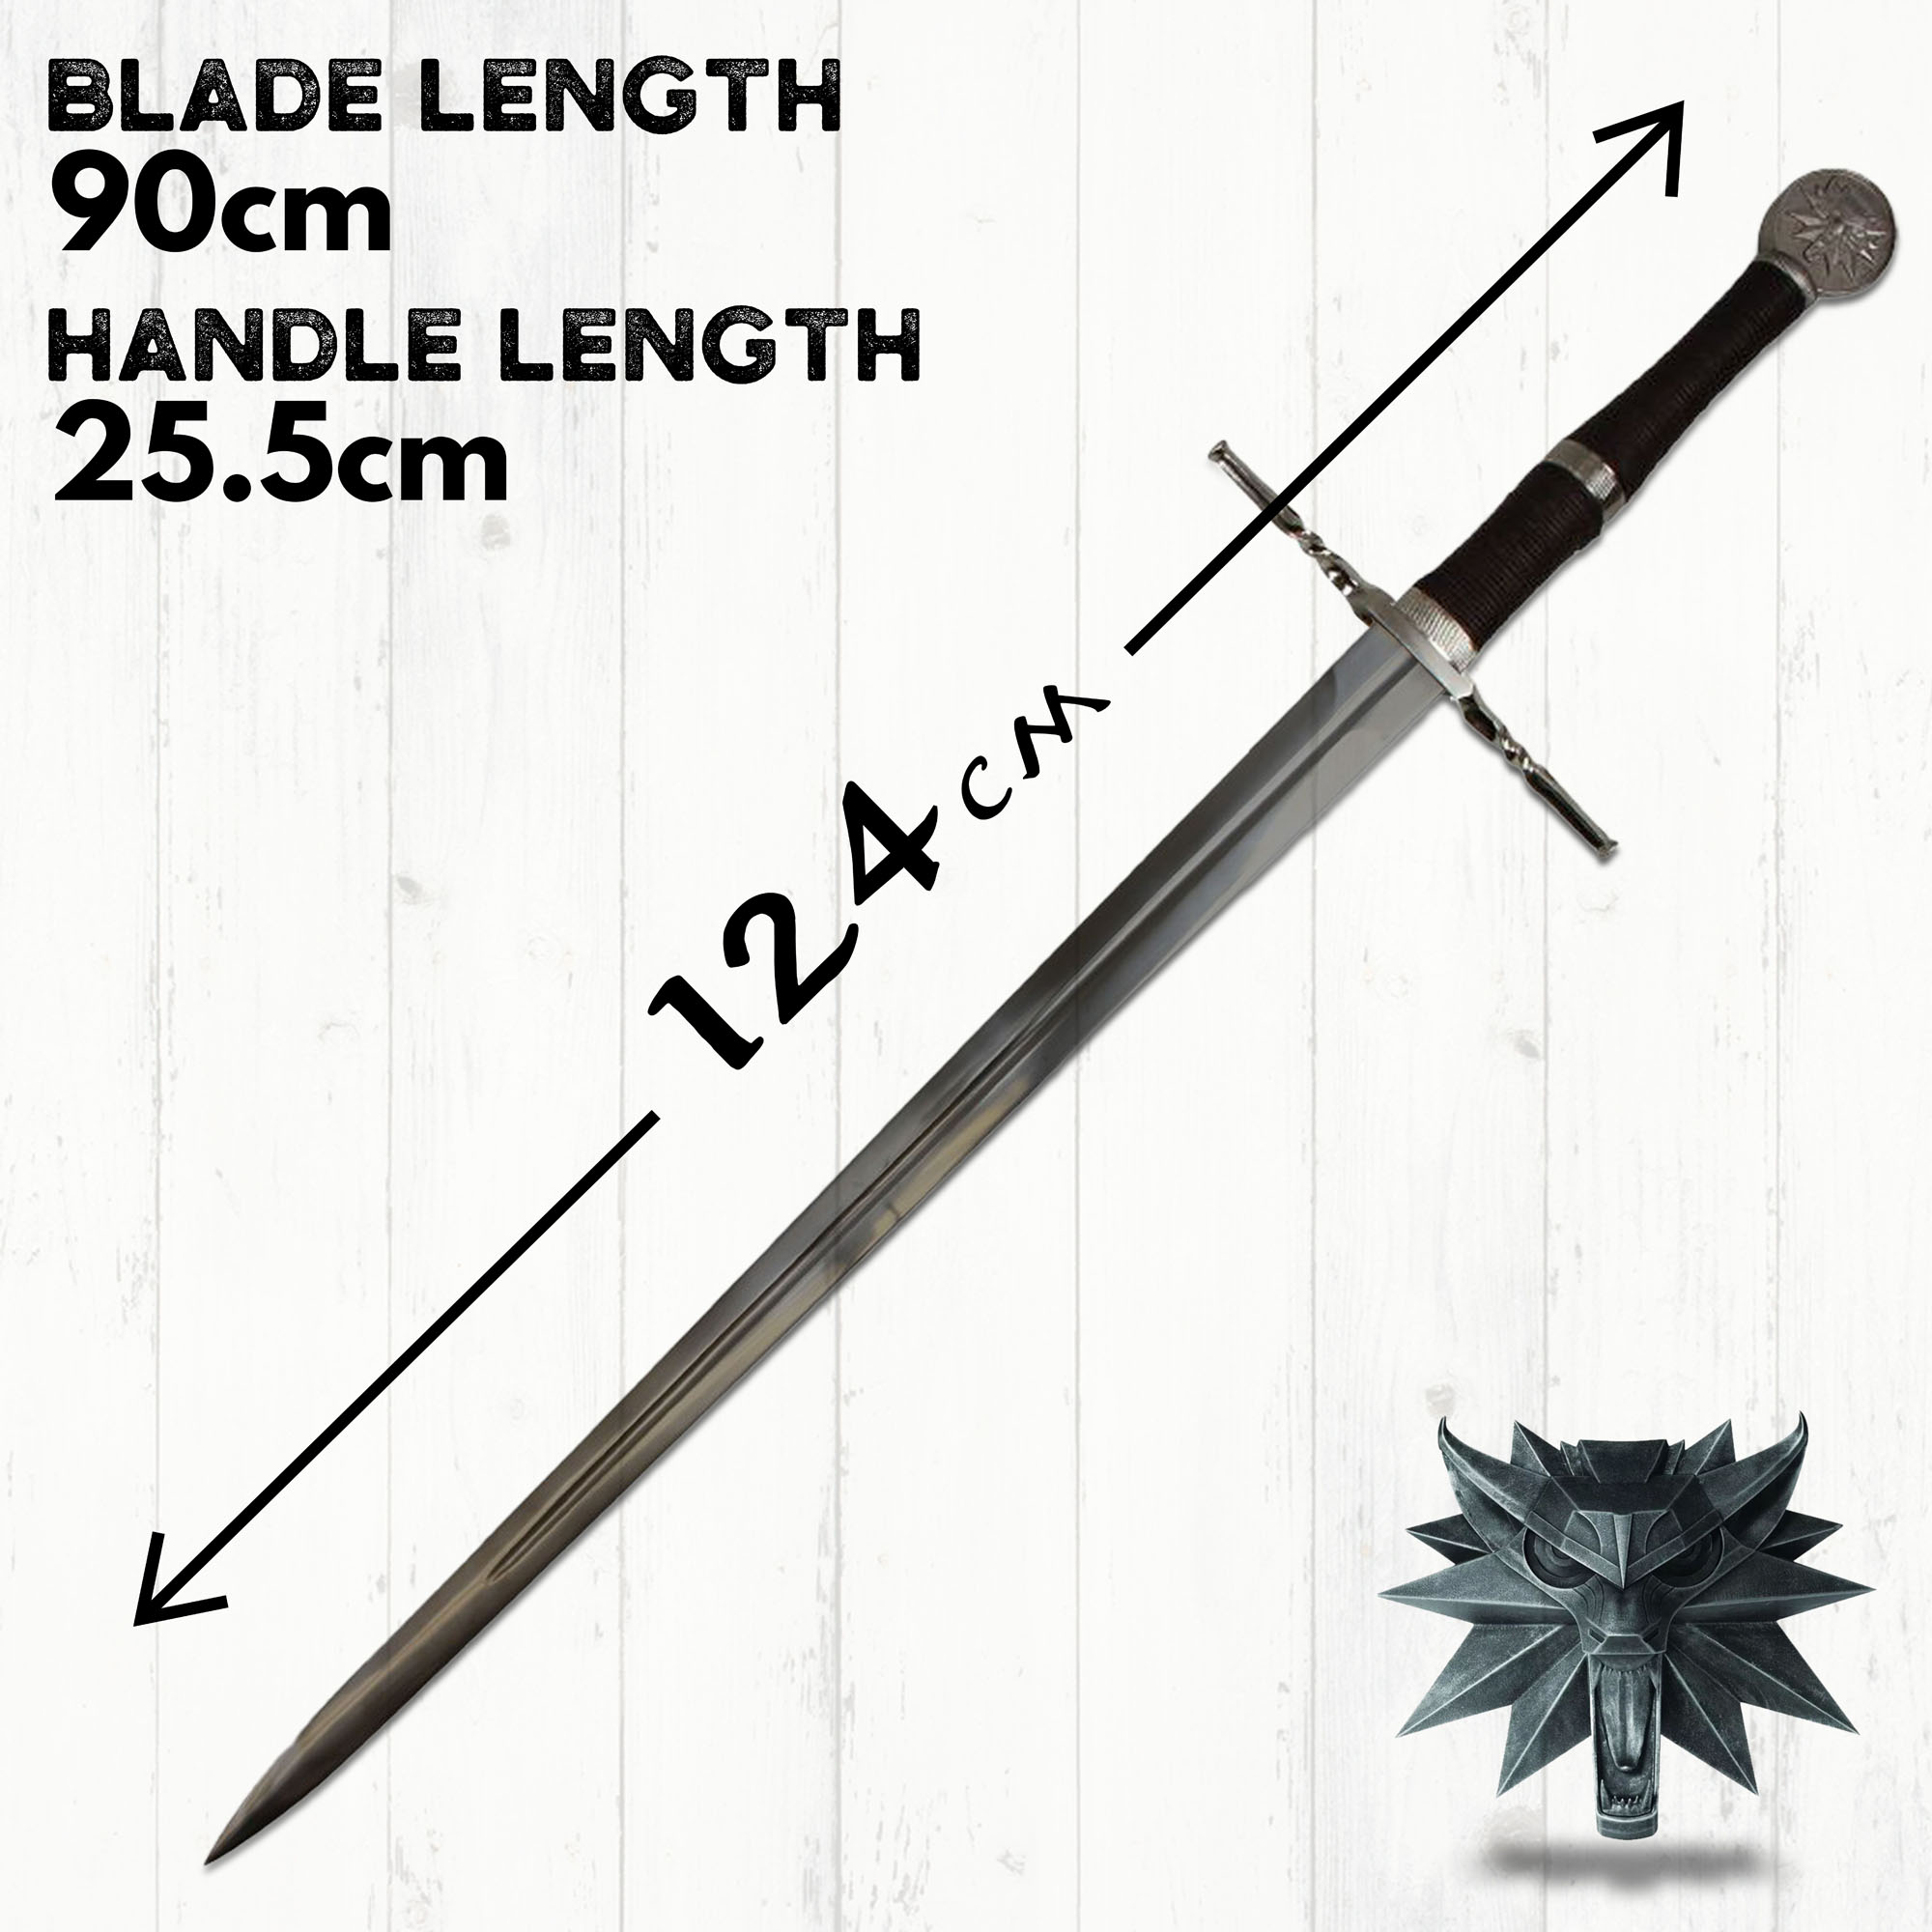 Witcher - Steel Sword with scabbard, handforged and folded